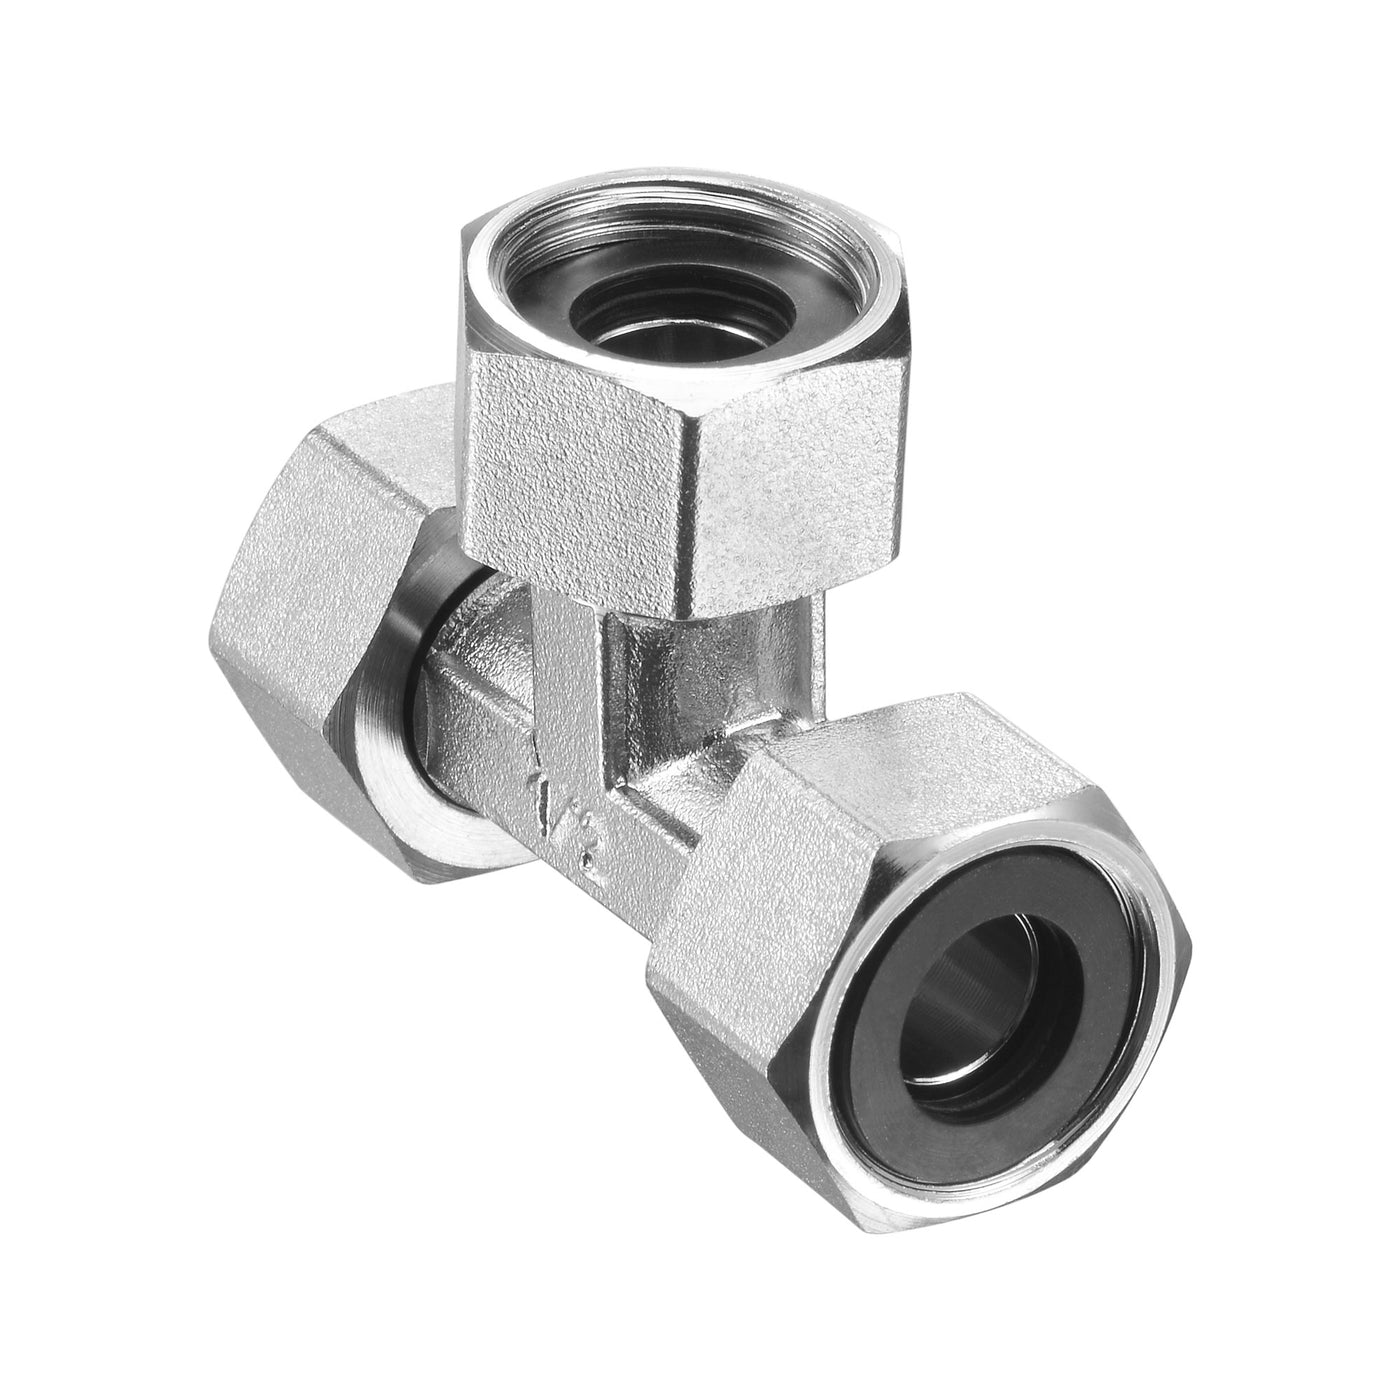 uxcell Uxcell Pipe Fitting Tee G1/2 Female Thread 3 Way T Shape Swivel Nut Hose Connector Adapter, Nickel-Plated Copper